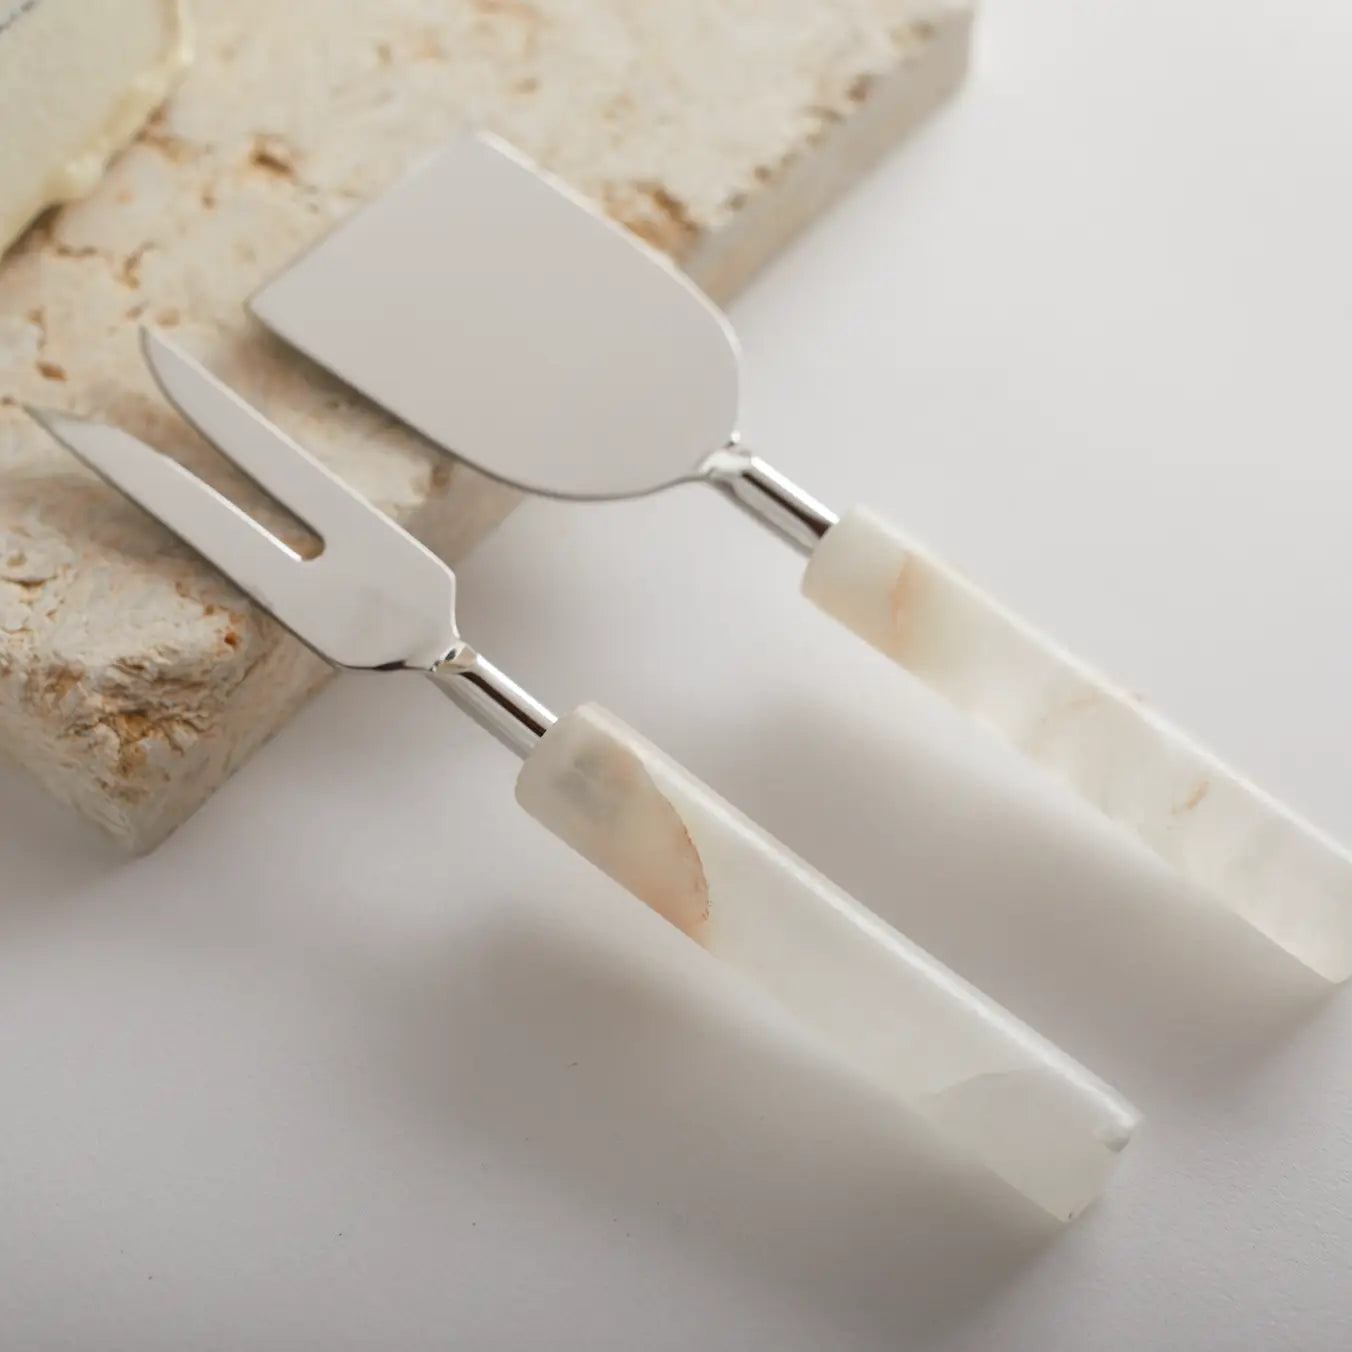 Santo Alabaster Cheese Tools Set of 2